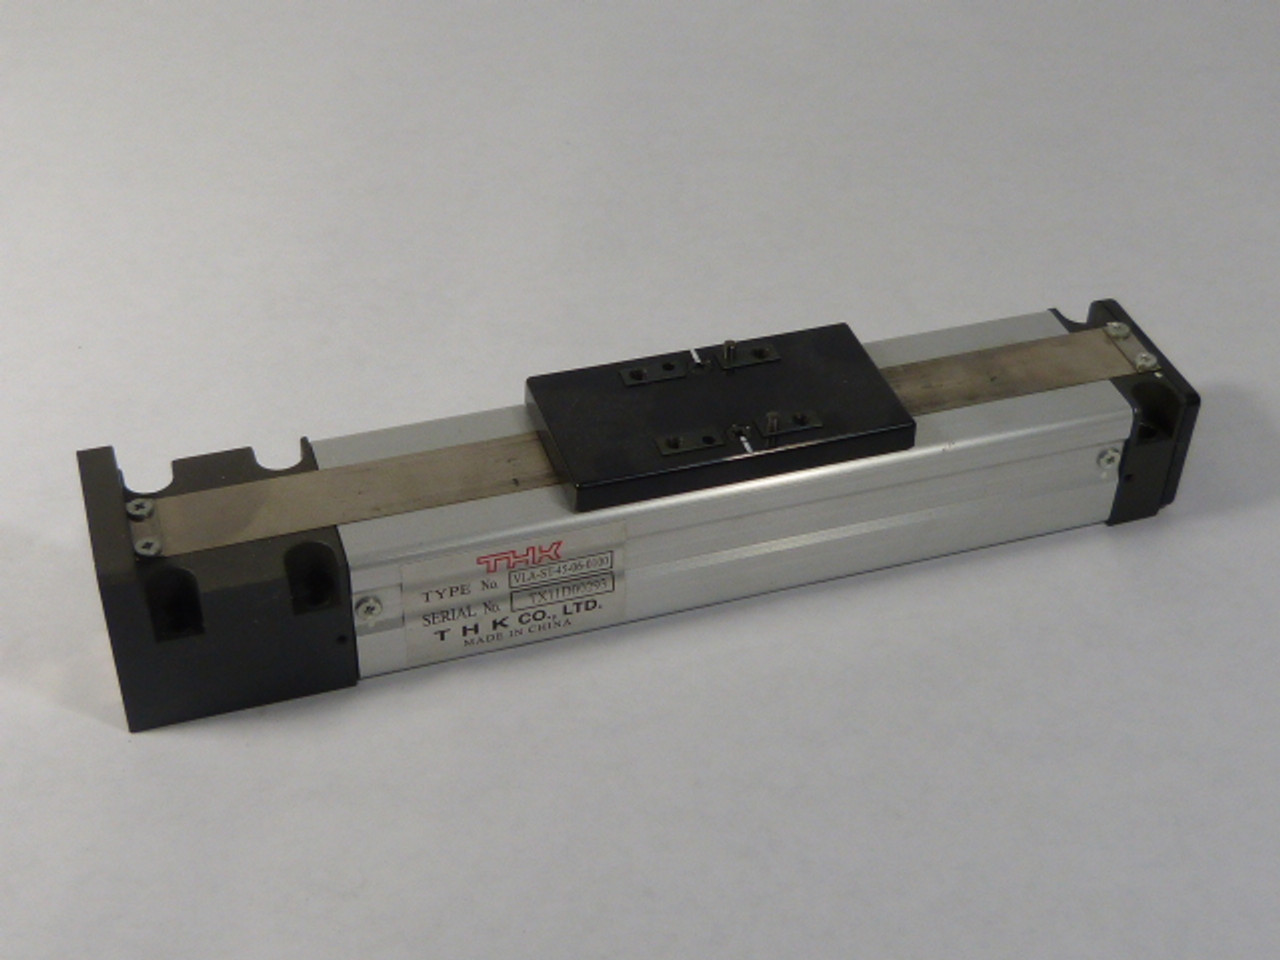 THK VLA-ST-45-06-0100 Rodless Linear Actuator 100mm Stroke USED